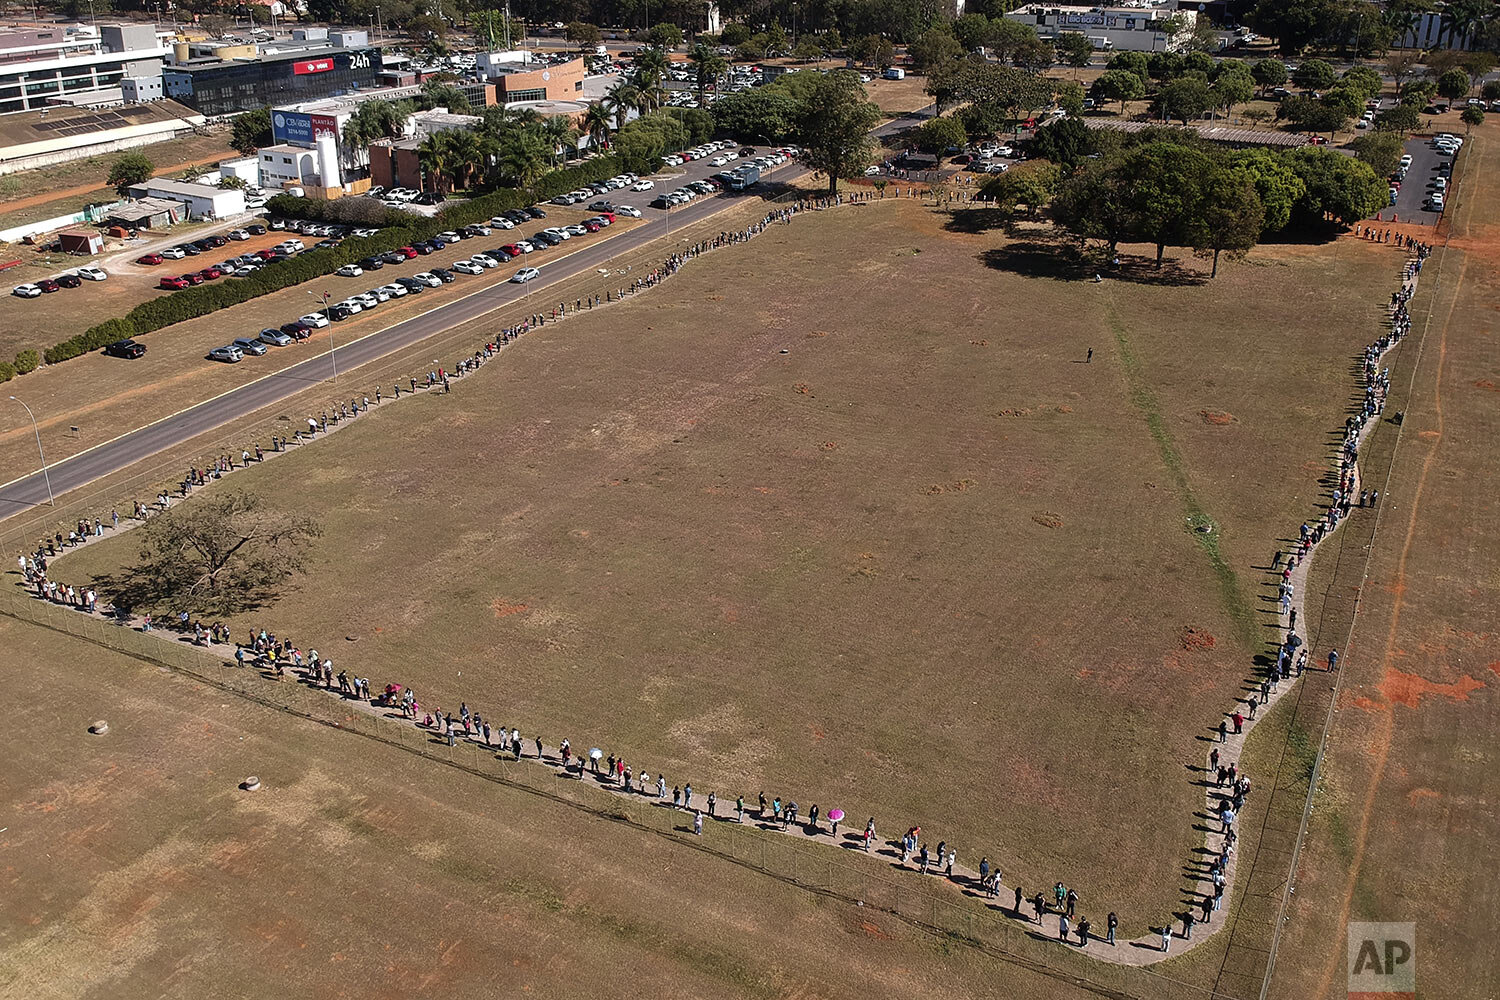  A line of people snakes around a field to enter a COVID-19 vaccination site, as people over age 30 became eligible for a vaccine in Brasilia, Brazil, Aug. 3, 2021. (AP Photo/Eraldo Peres) 